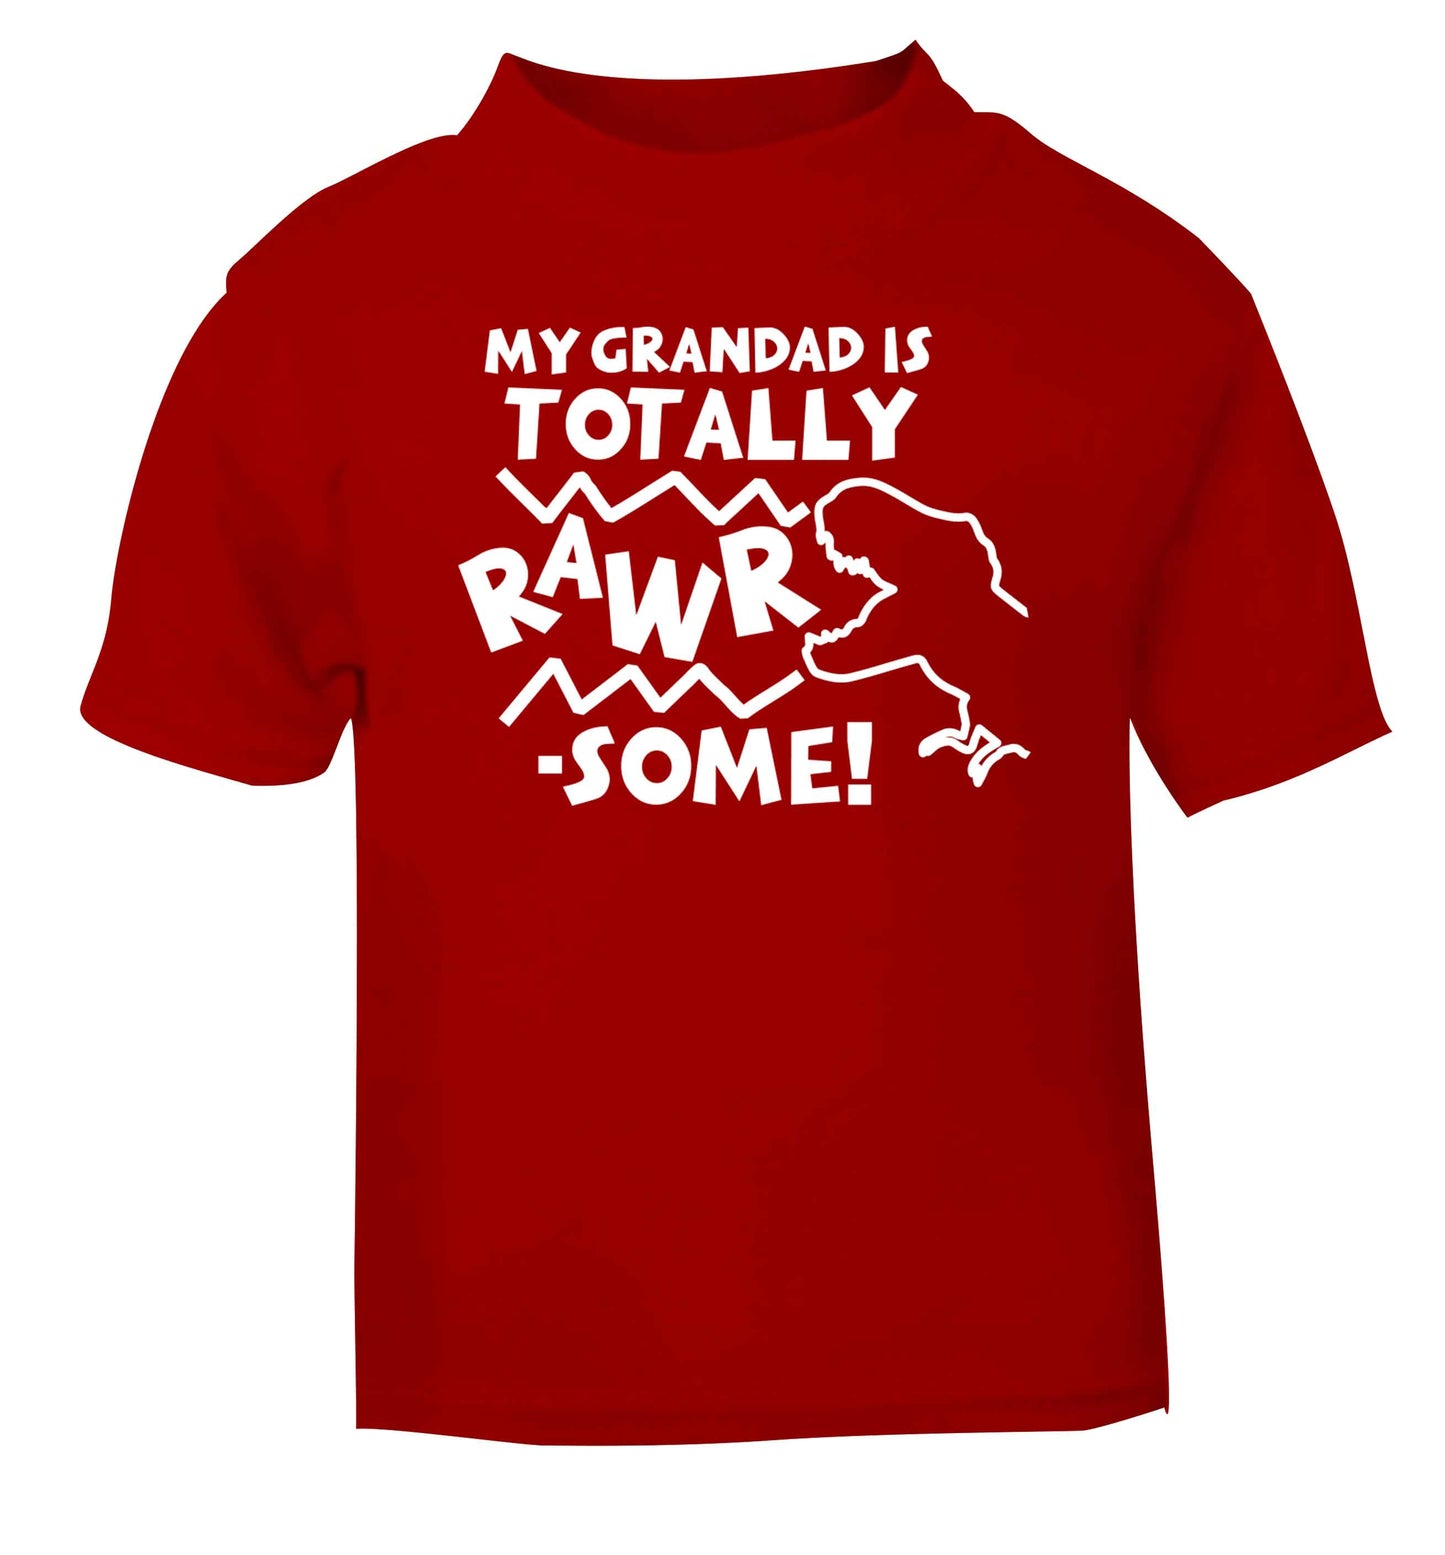 My grandad is totally rawrsome red baby toddler Tshirt 2 Years